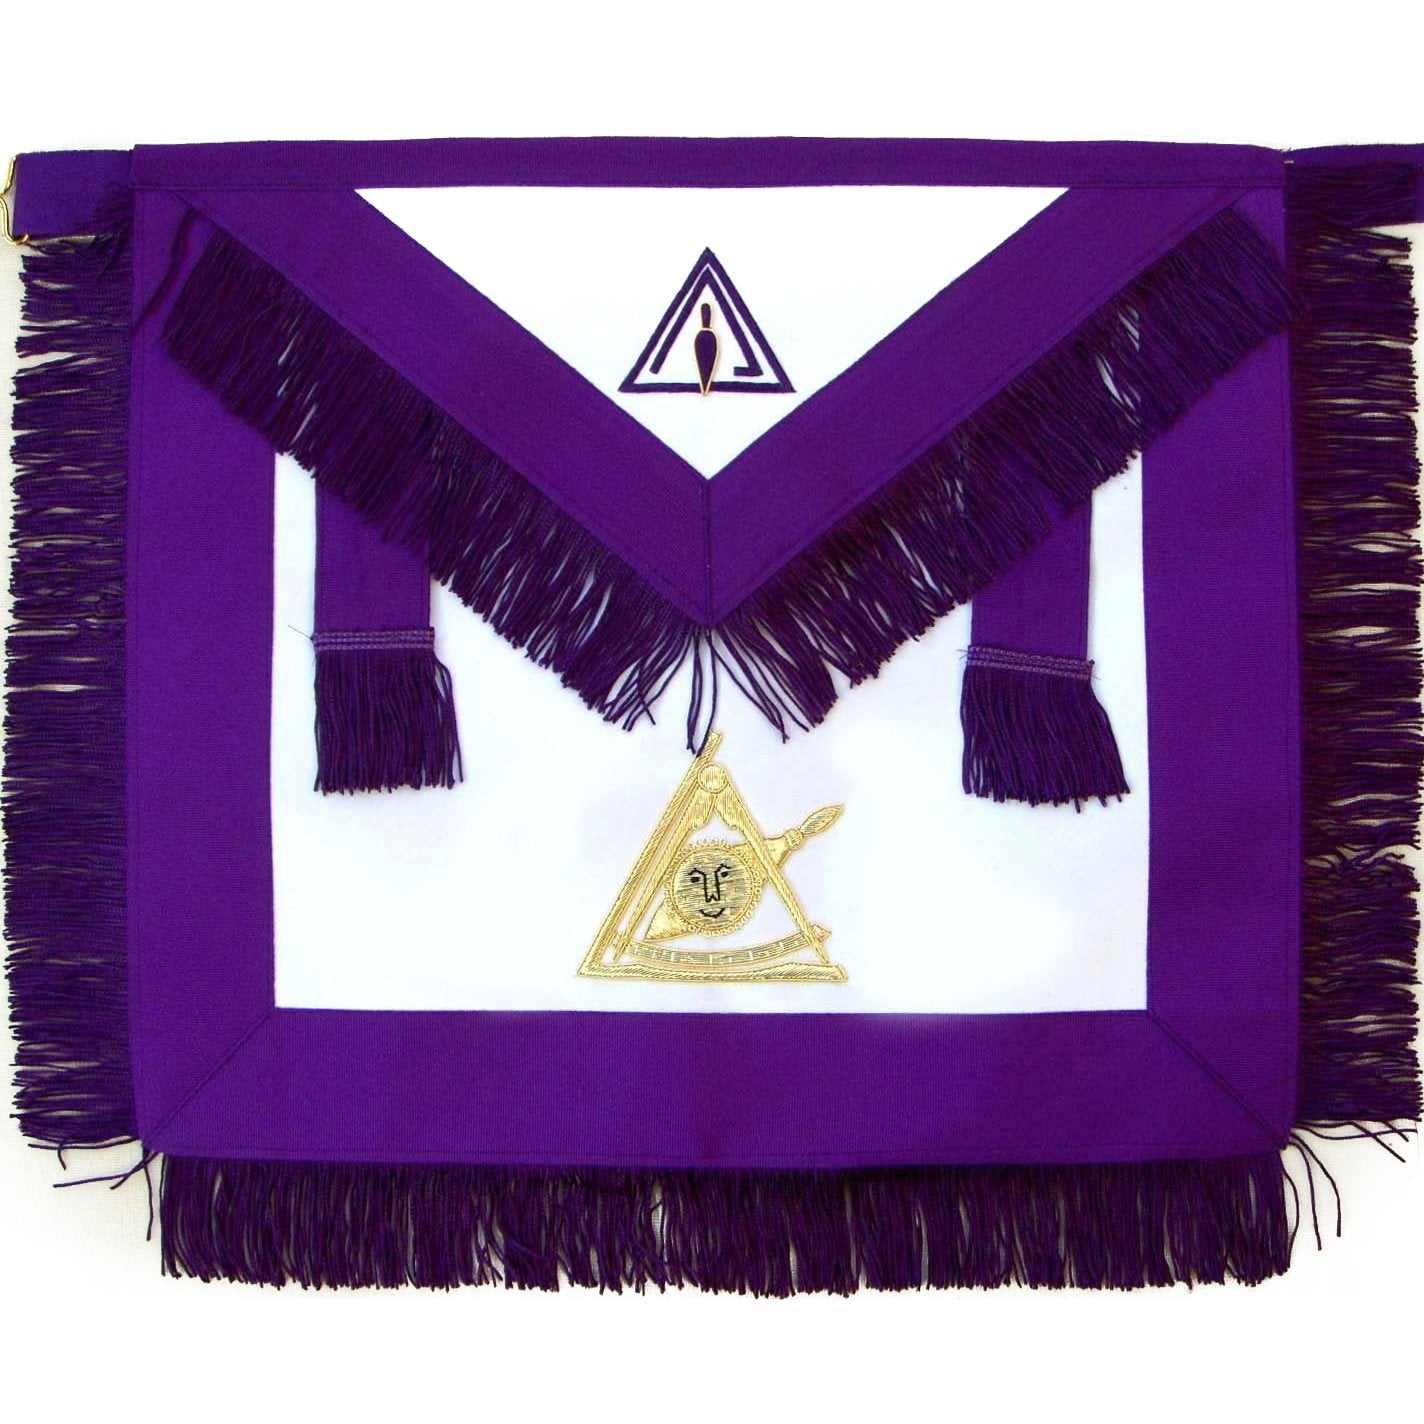 Past Illustrious Master Council Apron - Purple with Gold Hand Embroidery - Bricks Masons